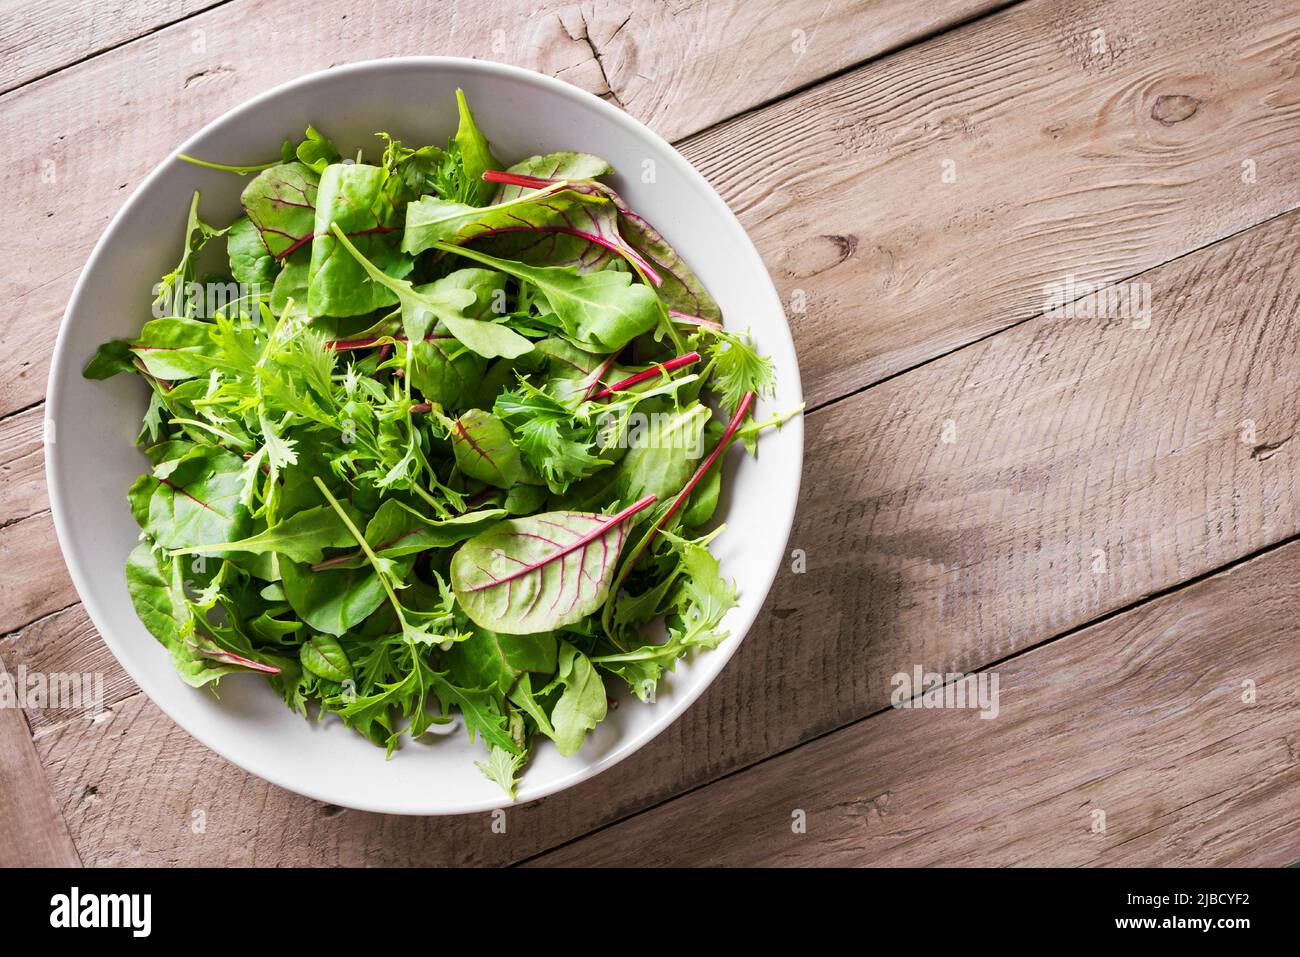 Green Salad Mix. Healthy green salad, fresh organic leaves mix salad with arugula, swiss chard and lettuce, wooden background, top view, copy space. Stock Photo